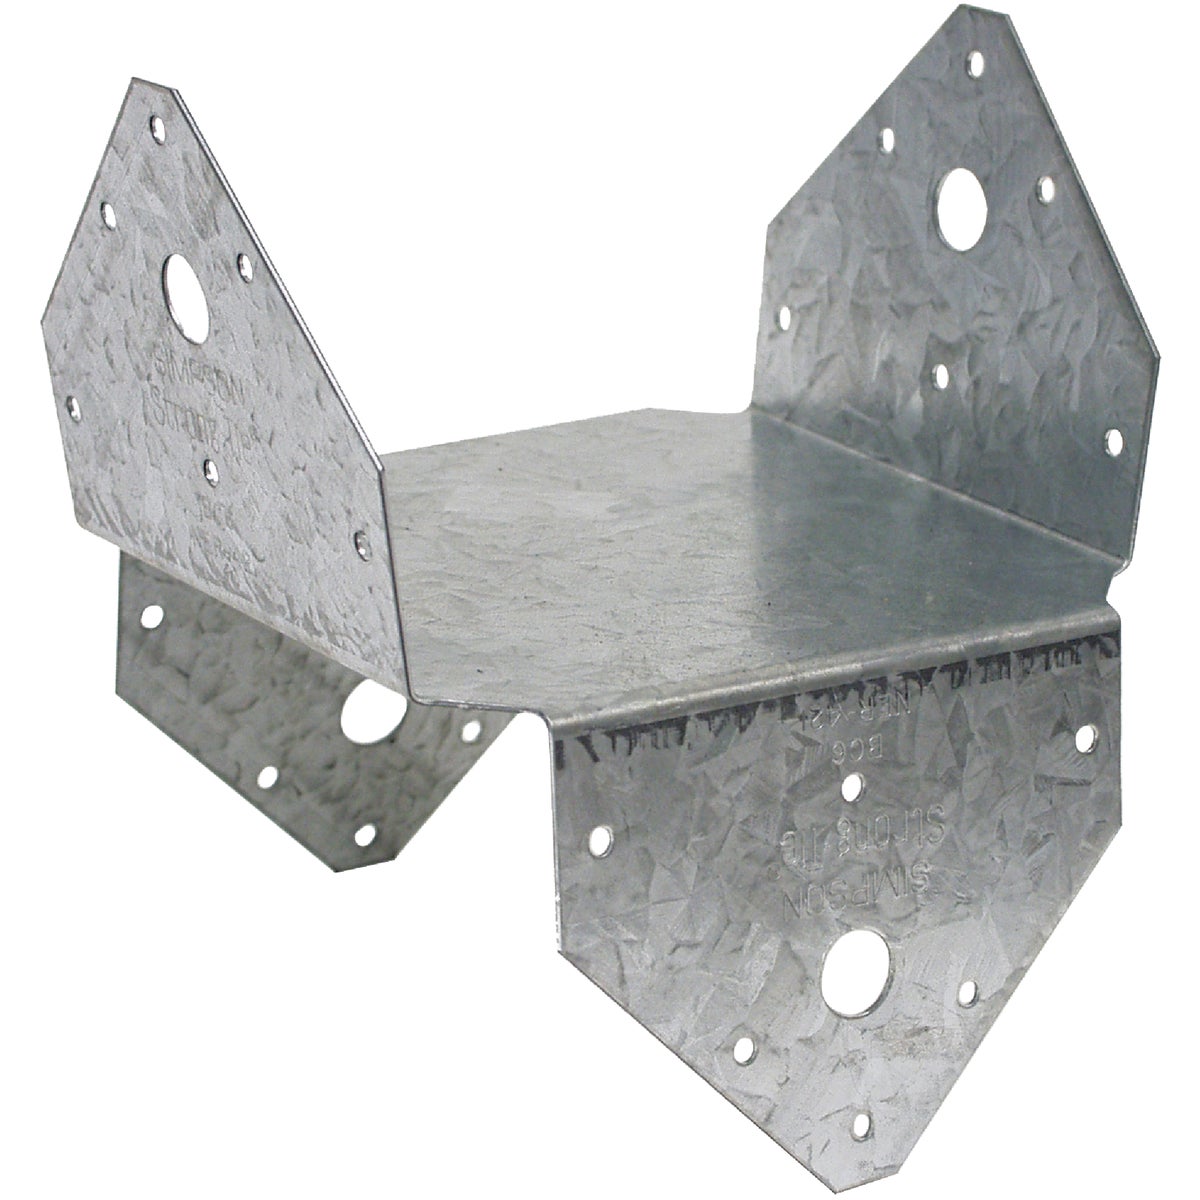 Item 107592, The BC series offers dual purpose post cap/base for light cap or base 